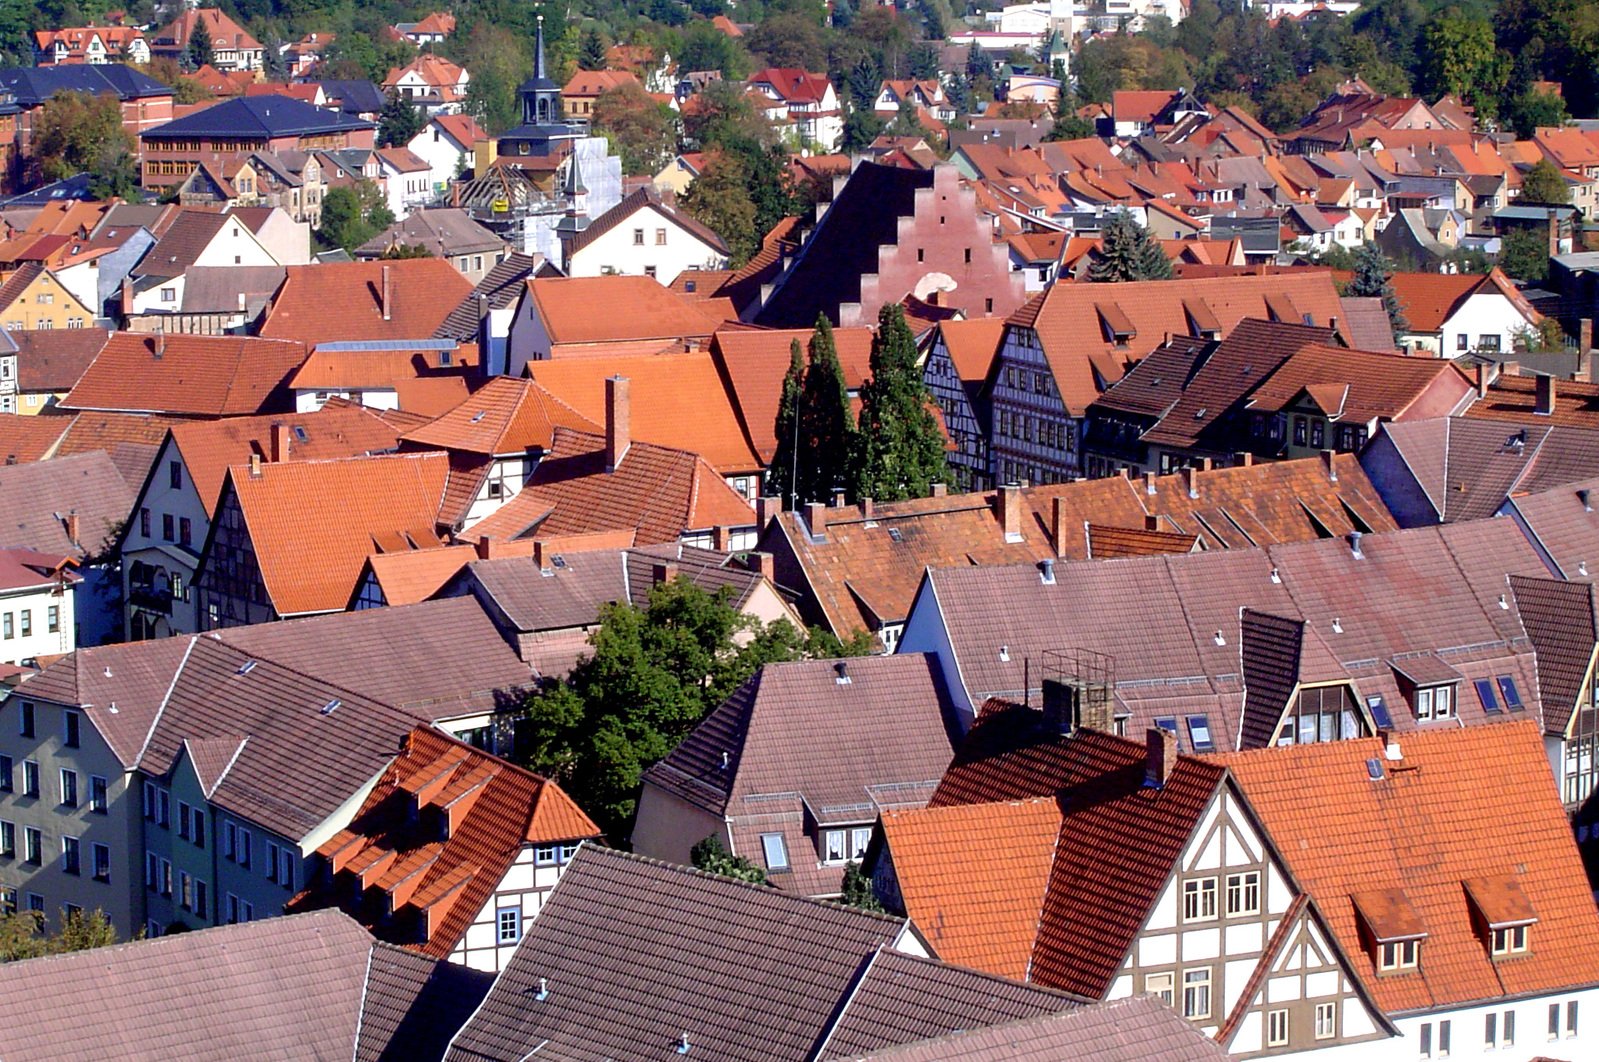 the tops of many buildings are covered in orange tile